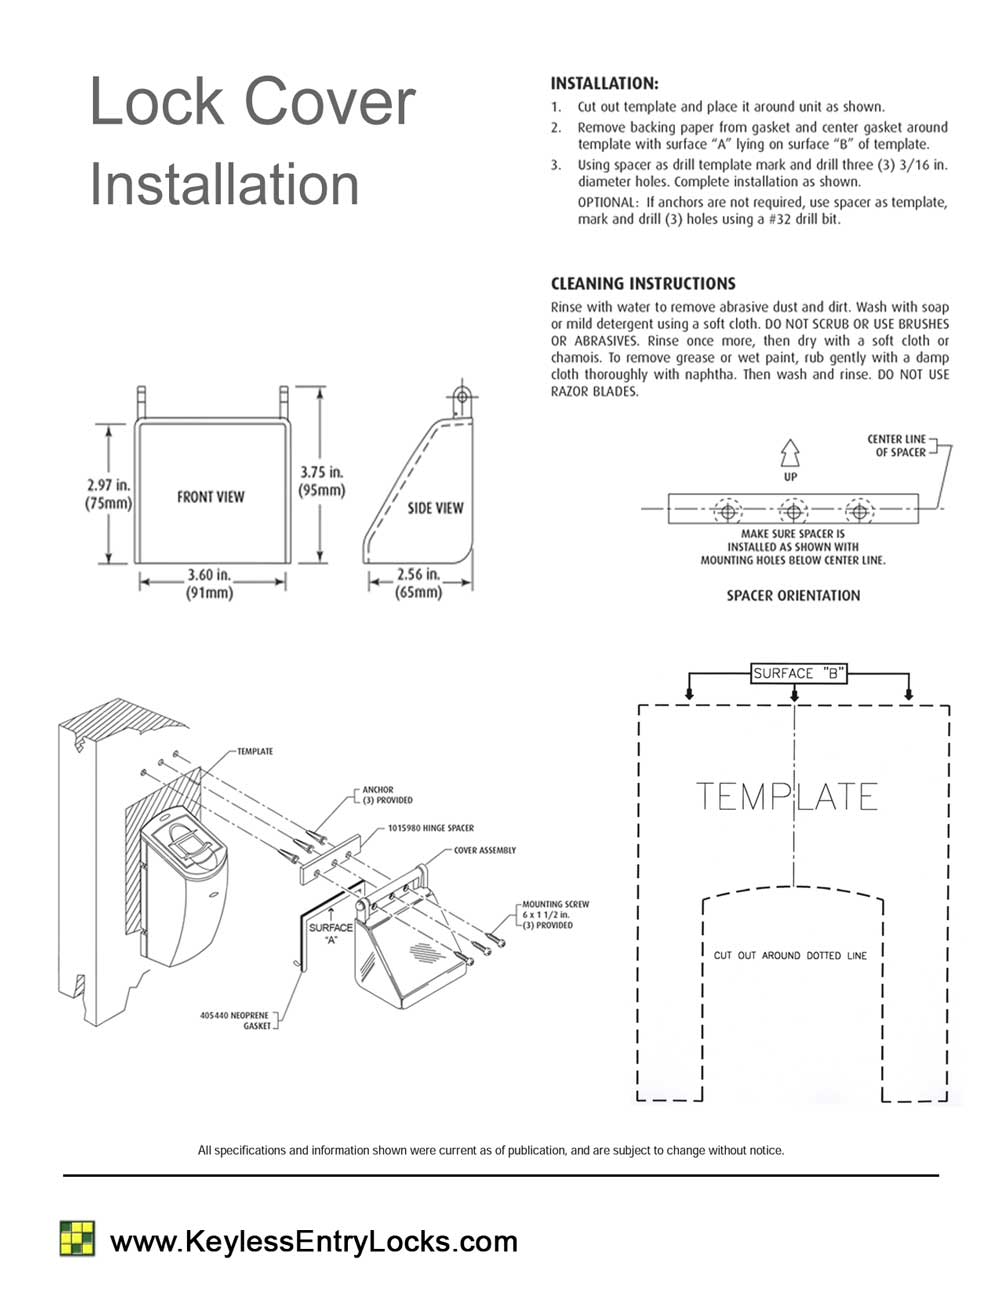 Polycarbonate Lock Cover - Installation Instructions & Template